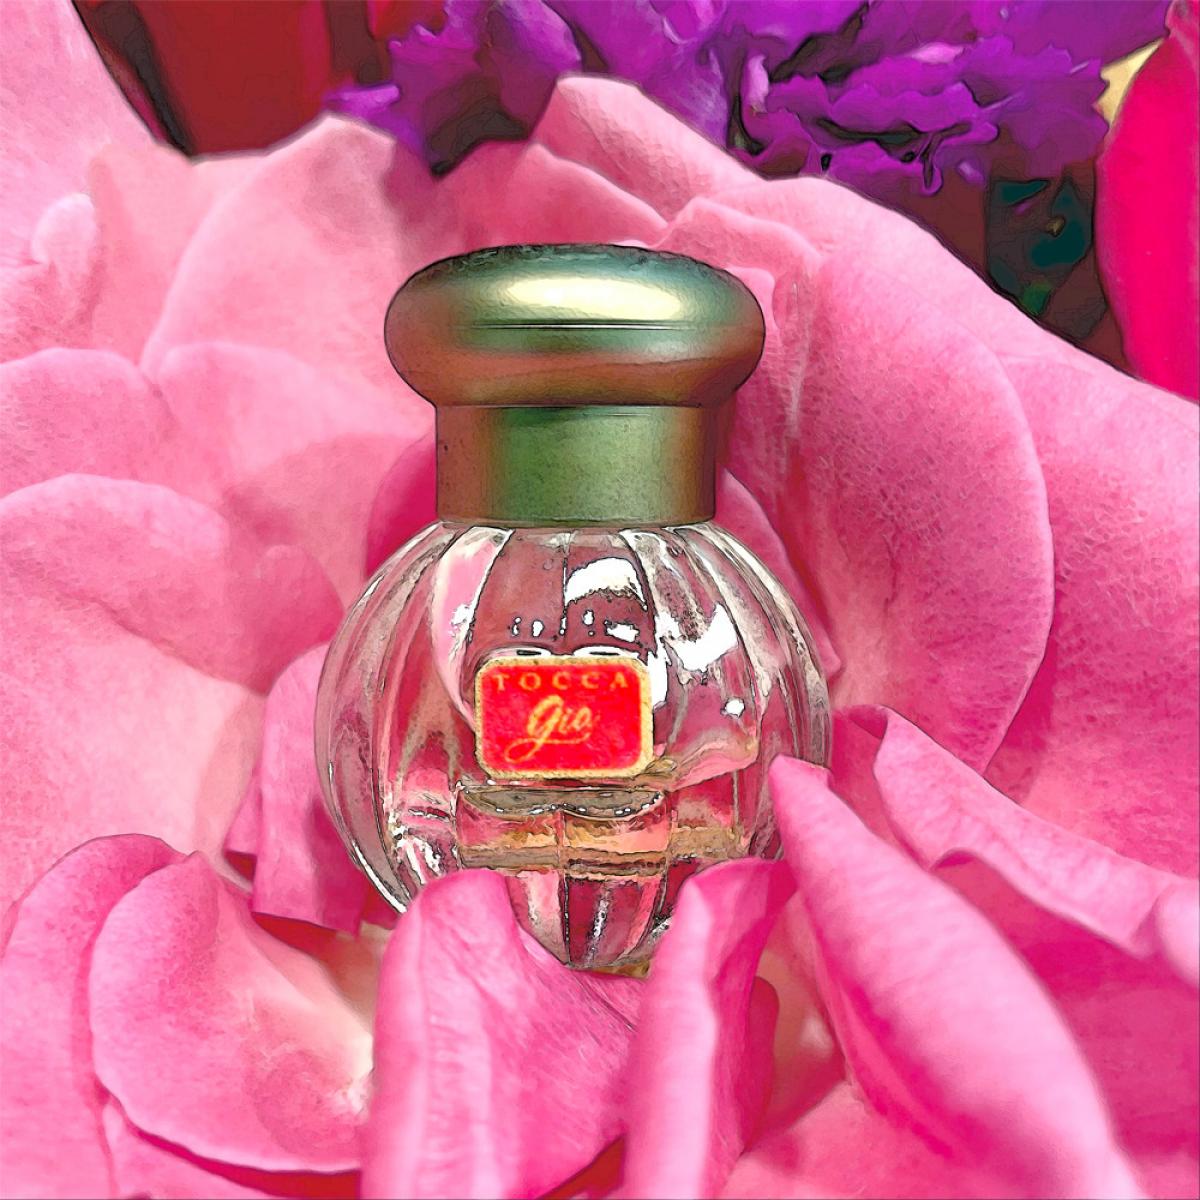 Gia Tocca perfume - a new fragrance for women 2019